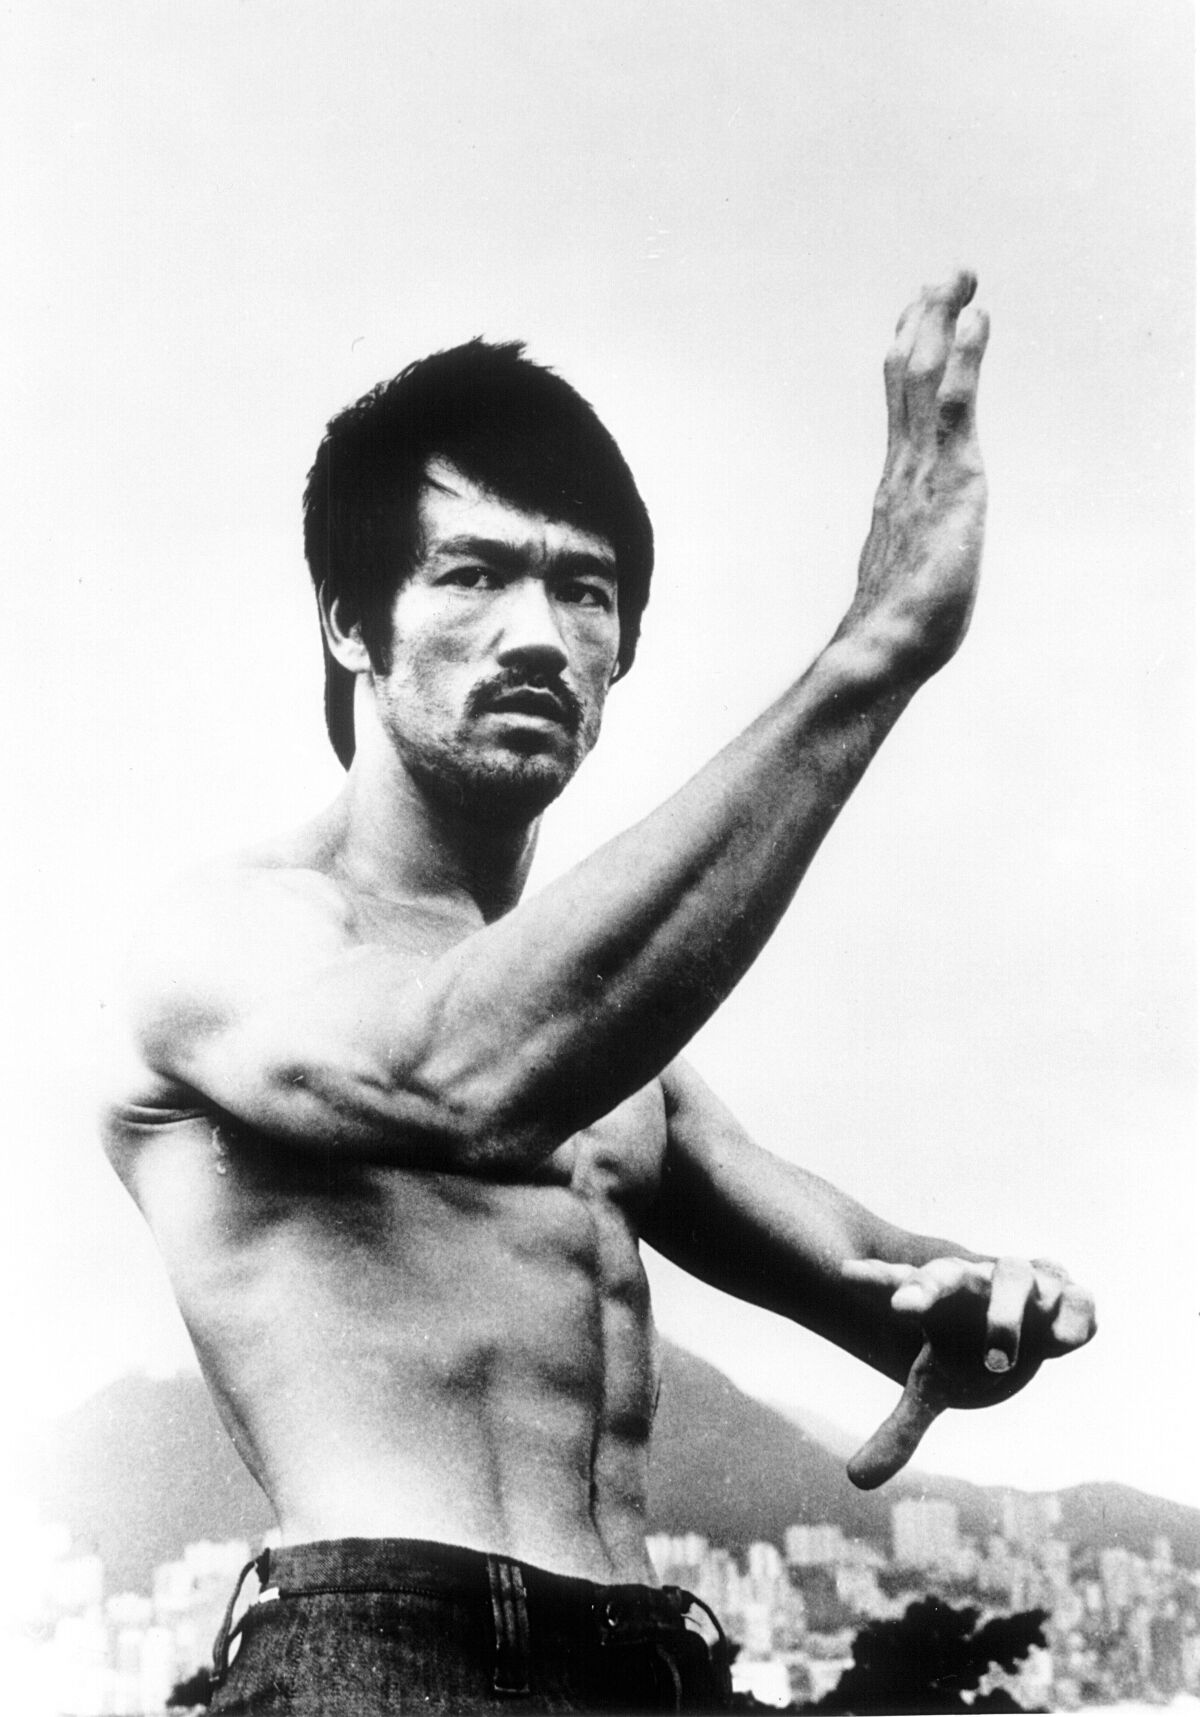 Bruce Lee is profiled in the ESPN documentary "Be Water."